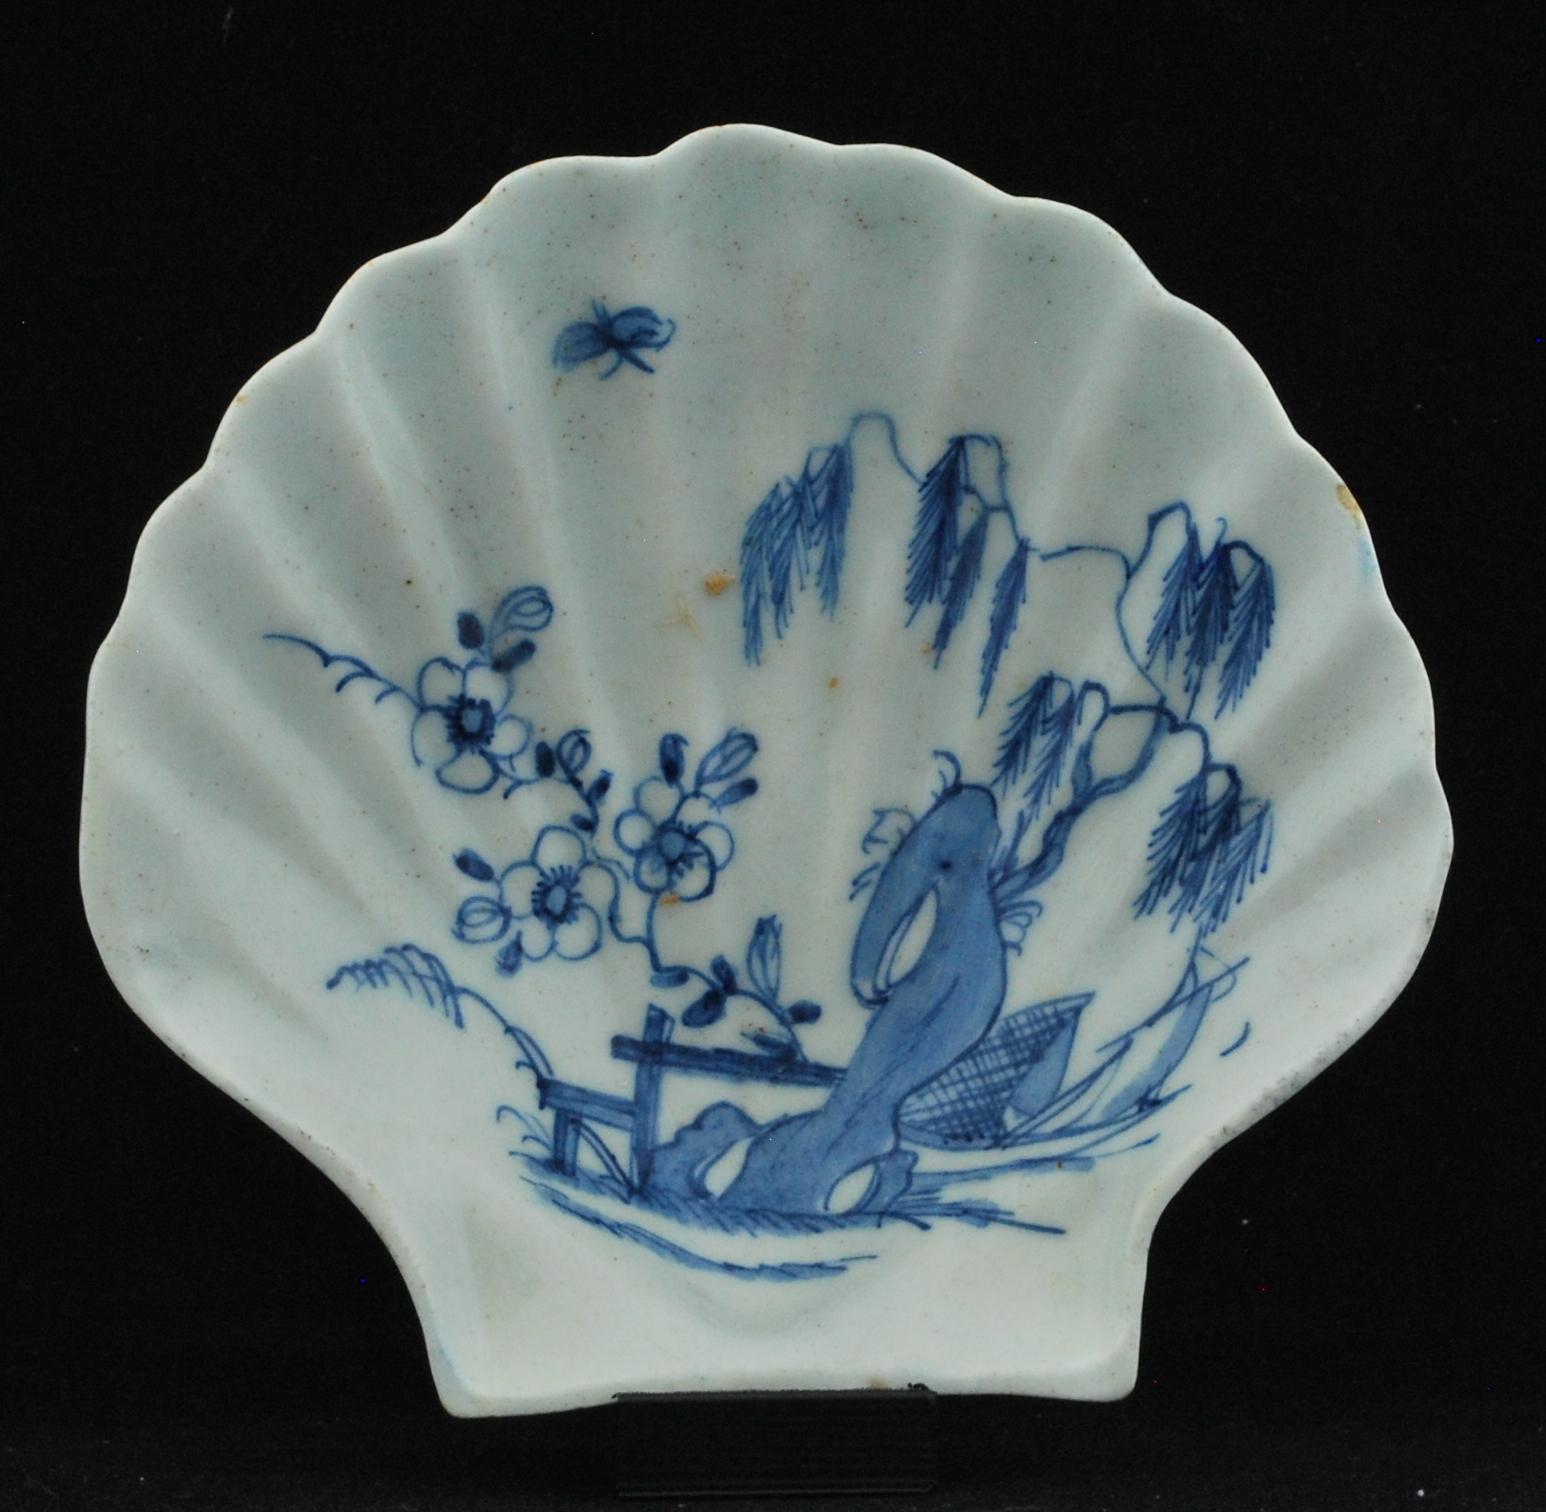 Shell dish, circa 1746-1748: Of scallop shell form on two peg feet; the interior painted in blue underglaze with a willow, rockwork, fence and flowering branches, a boat to the right, and an insect above; all a free adaptation from the Chinese